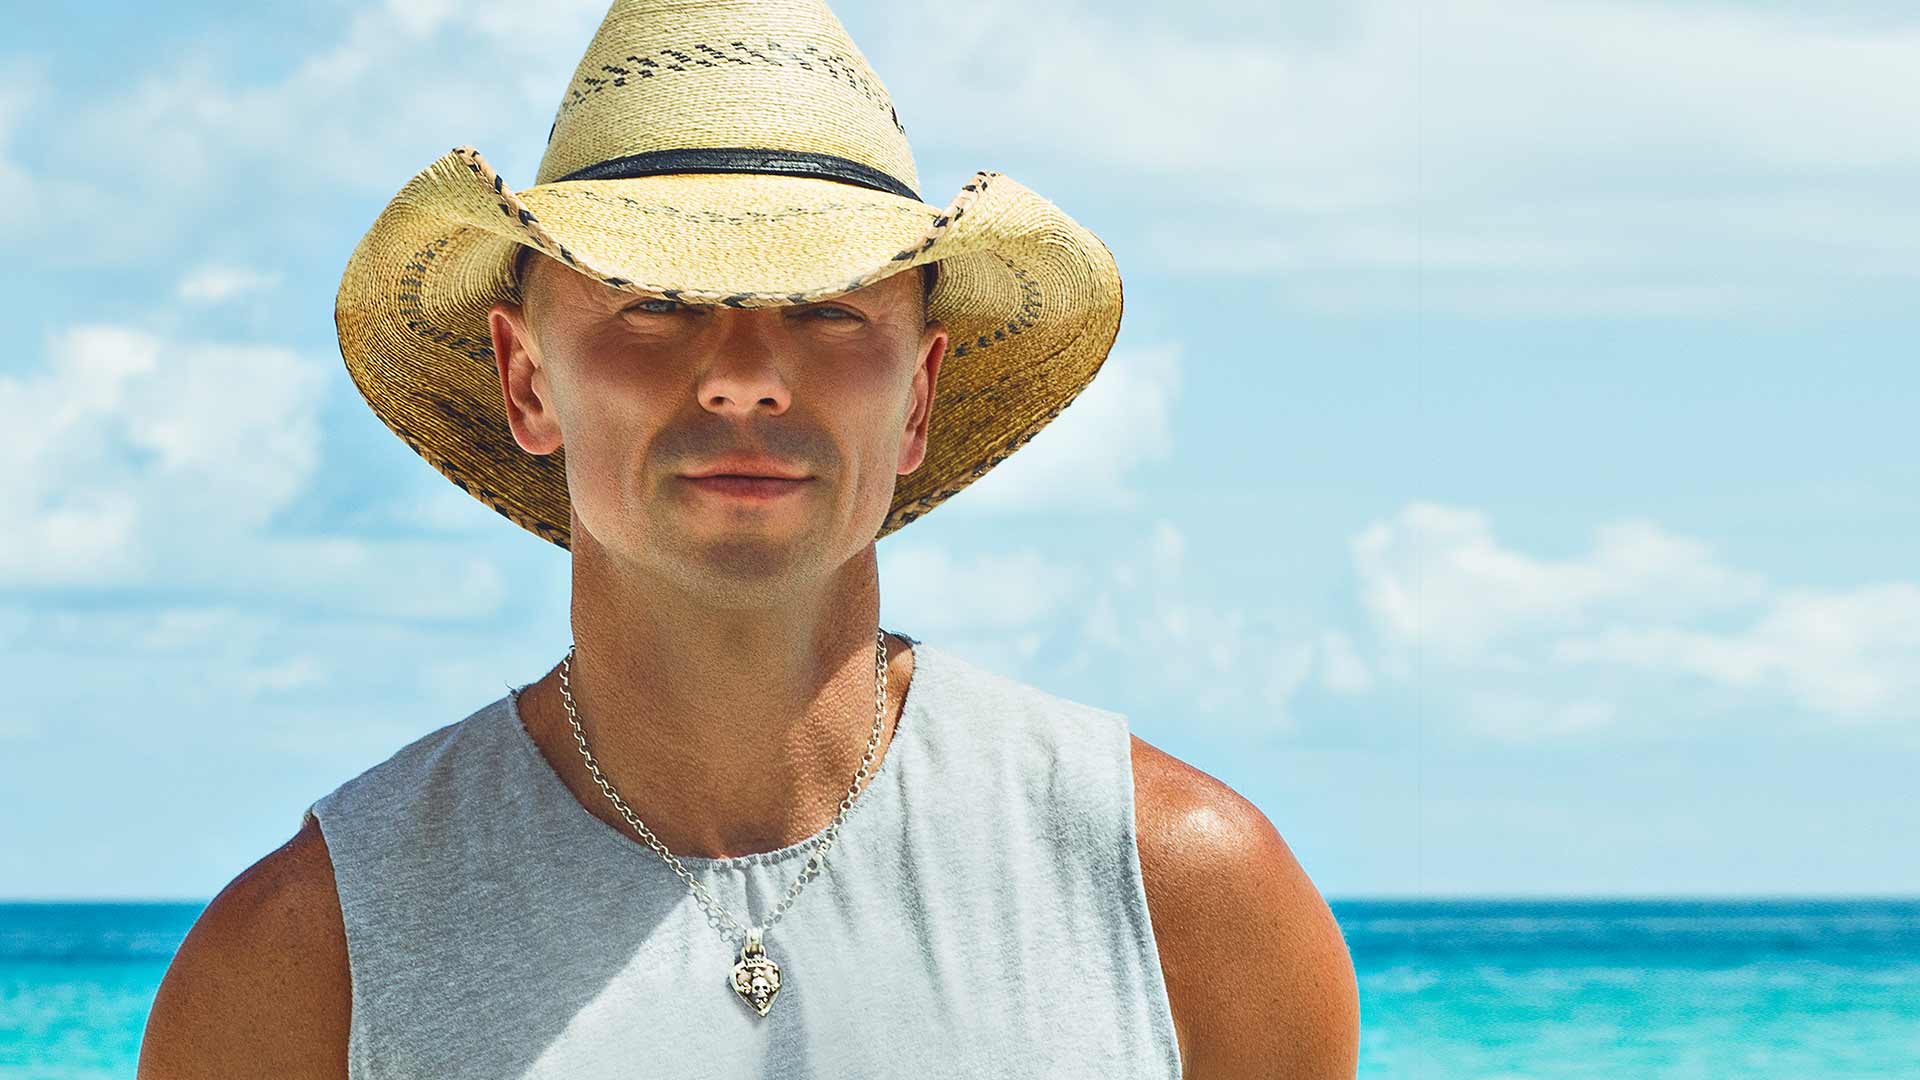 How tall is Kenny Chesney?